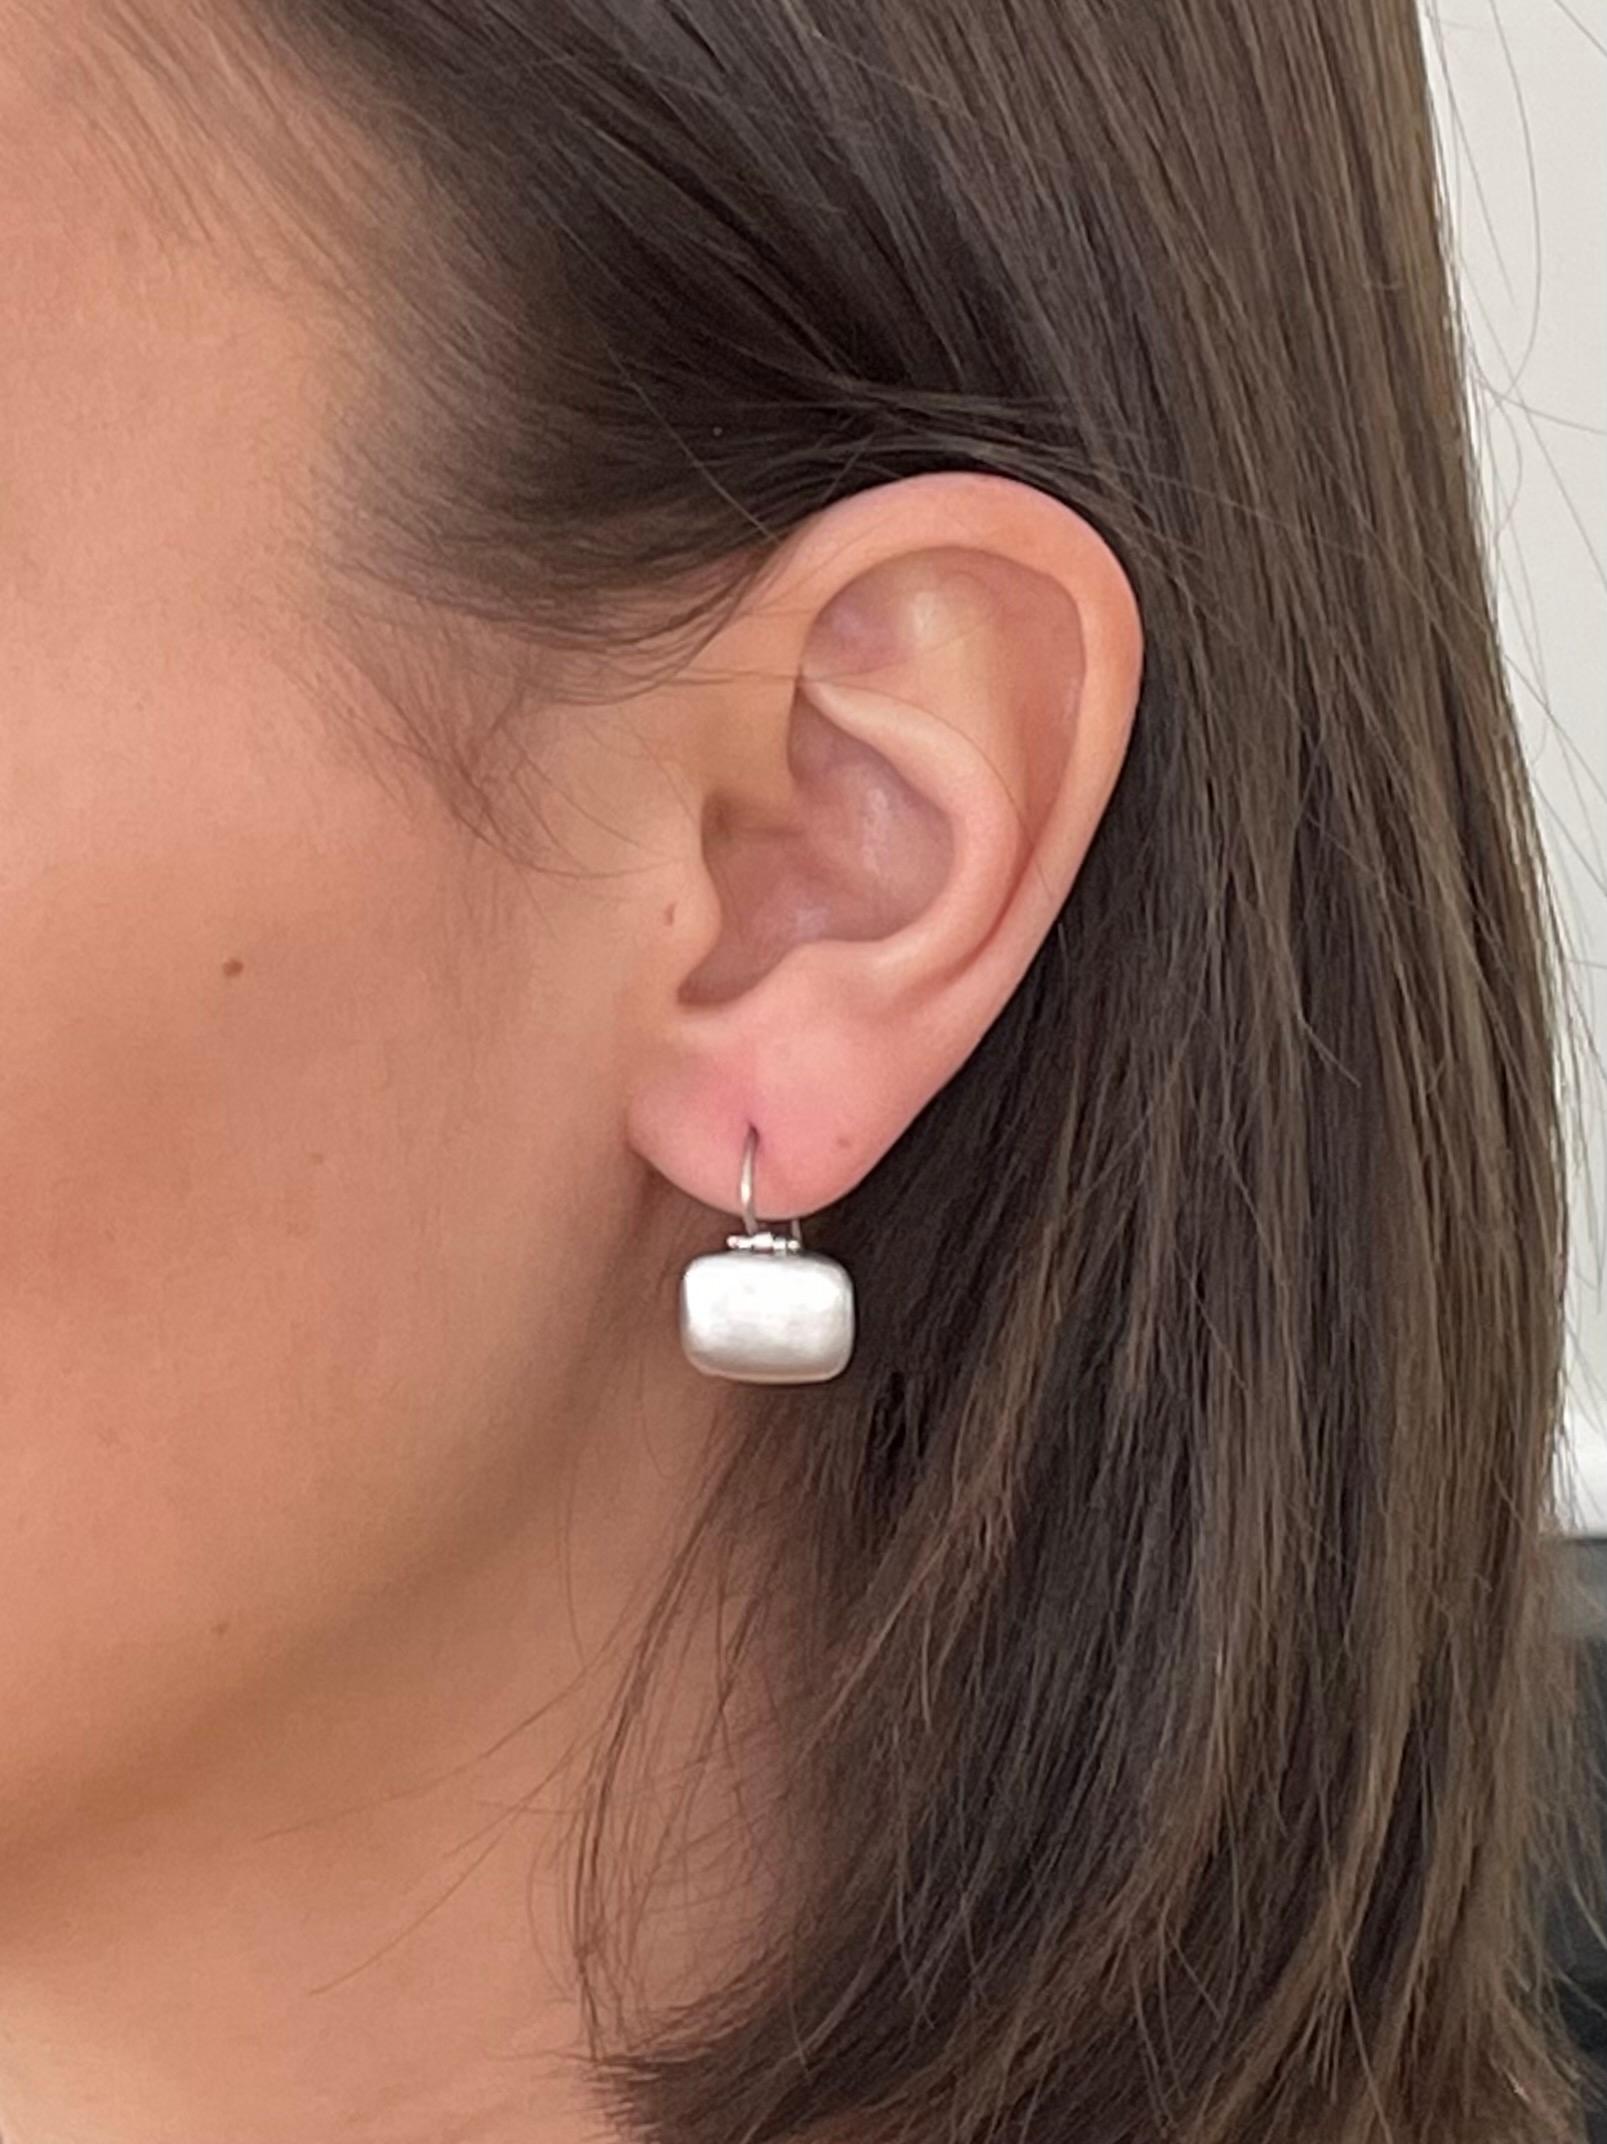 Clean, sleek, and modern, 18k white gold chiclet earrings have a  flattering shape and matte-finished.  Perfect for every day!

Earring length - .75